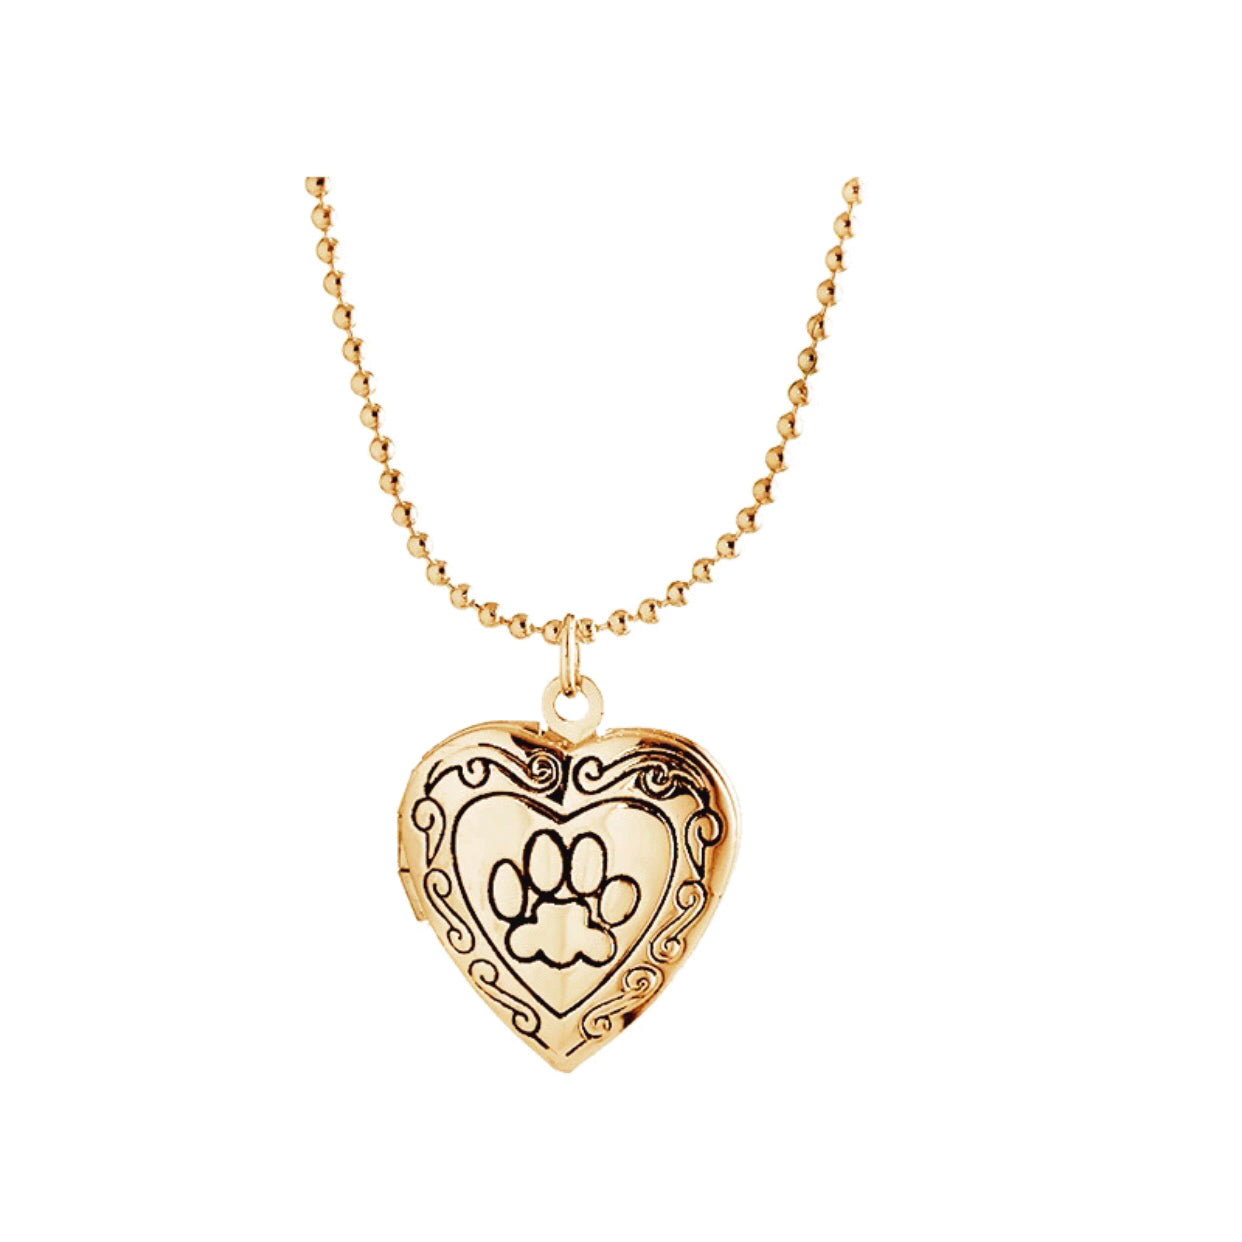 Heart Shaped Dog Paws Print Locket Pendant For Woman